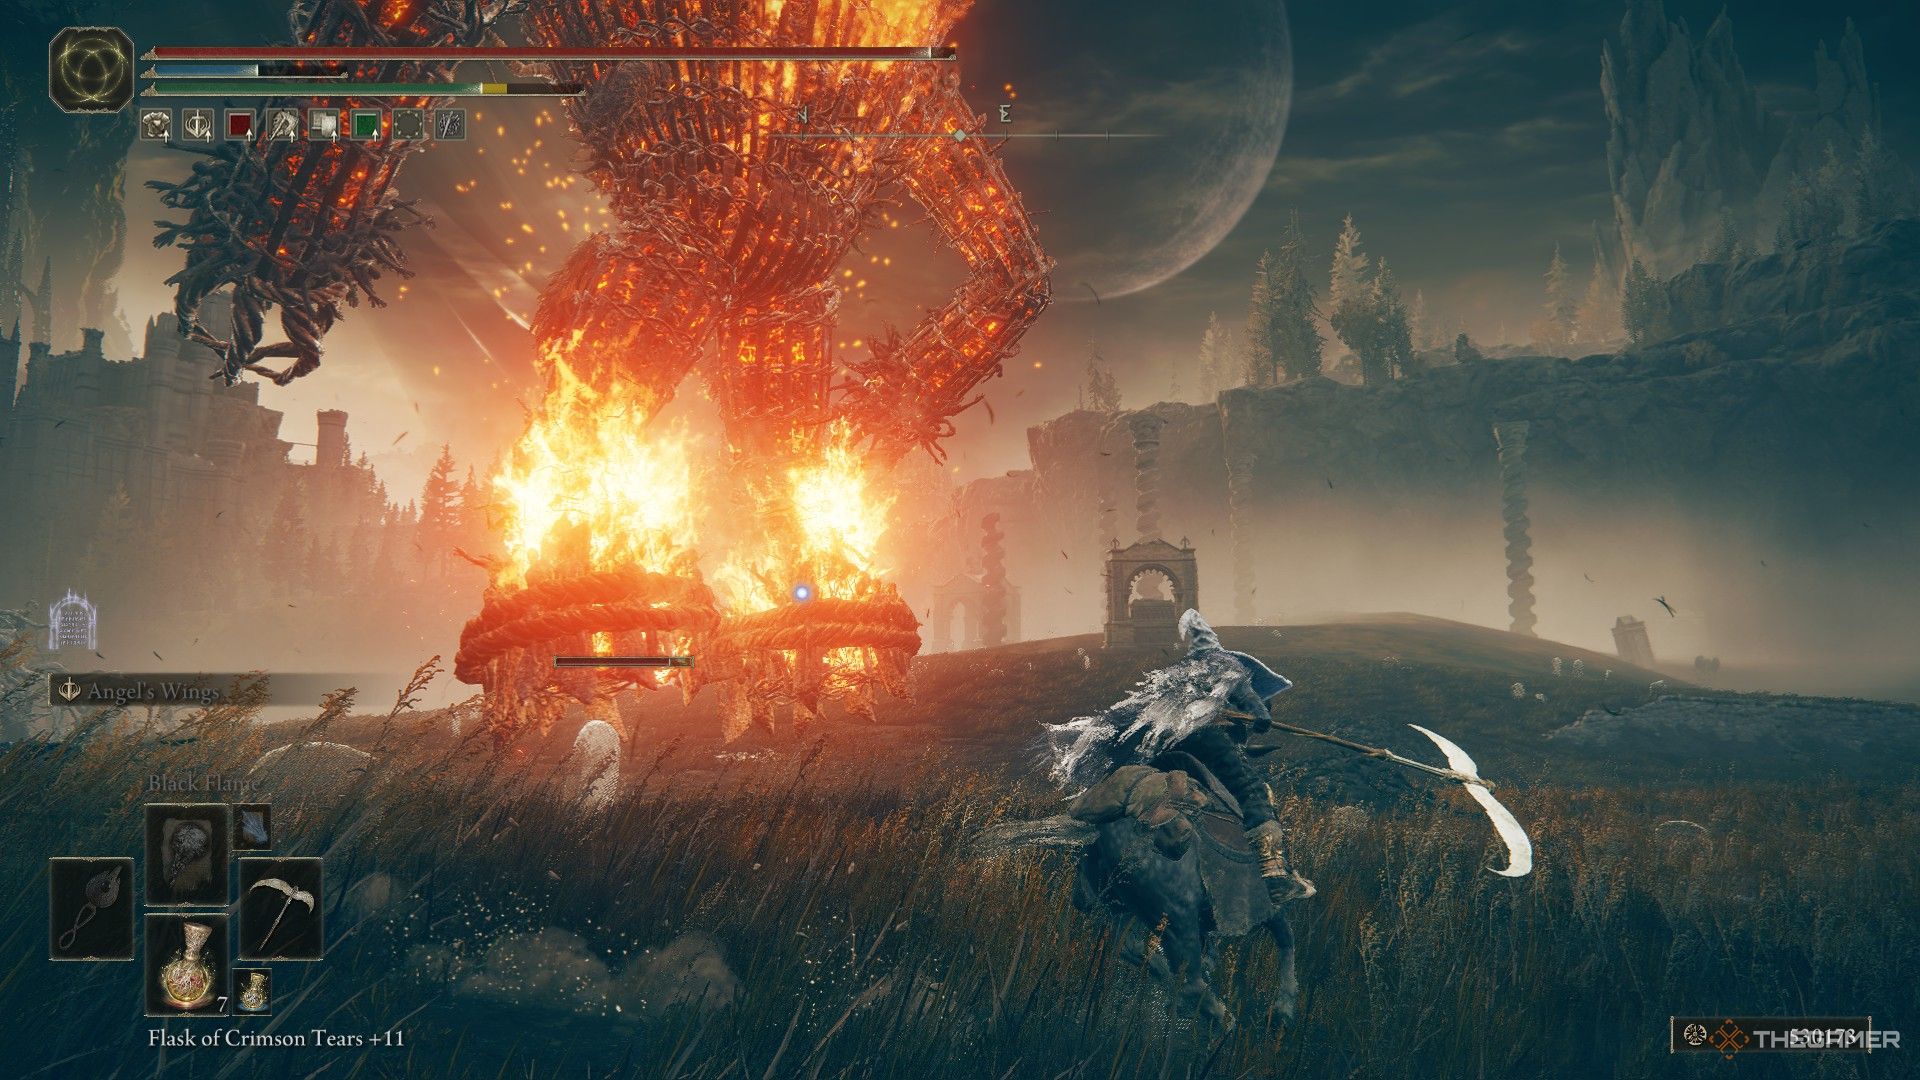 Furnace Golem falls back to the ground with fiery feet after a jump as player races nearby on Torren in Elden Ring: Shadow of the Erdtree.